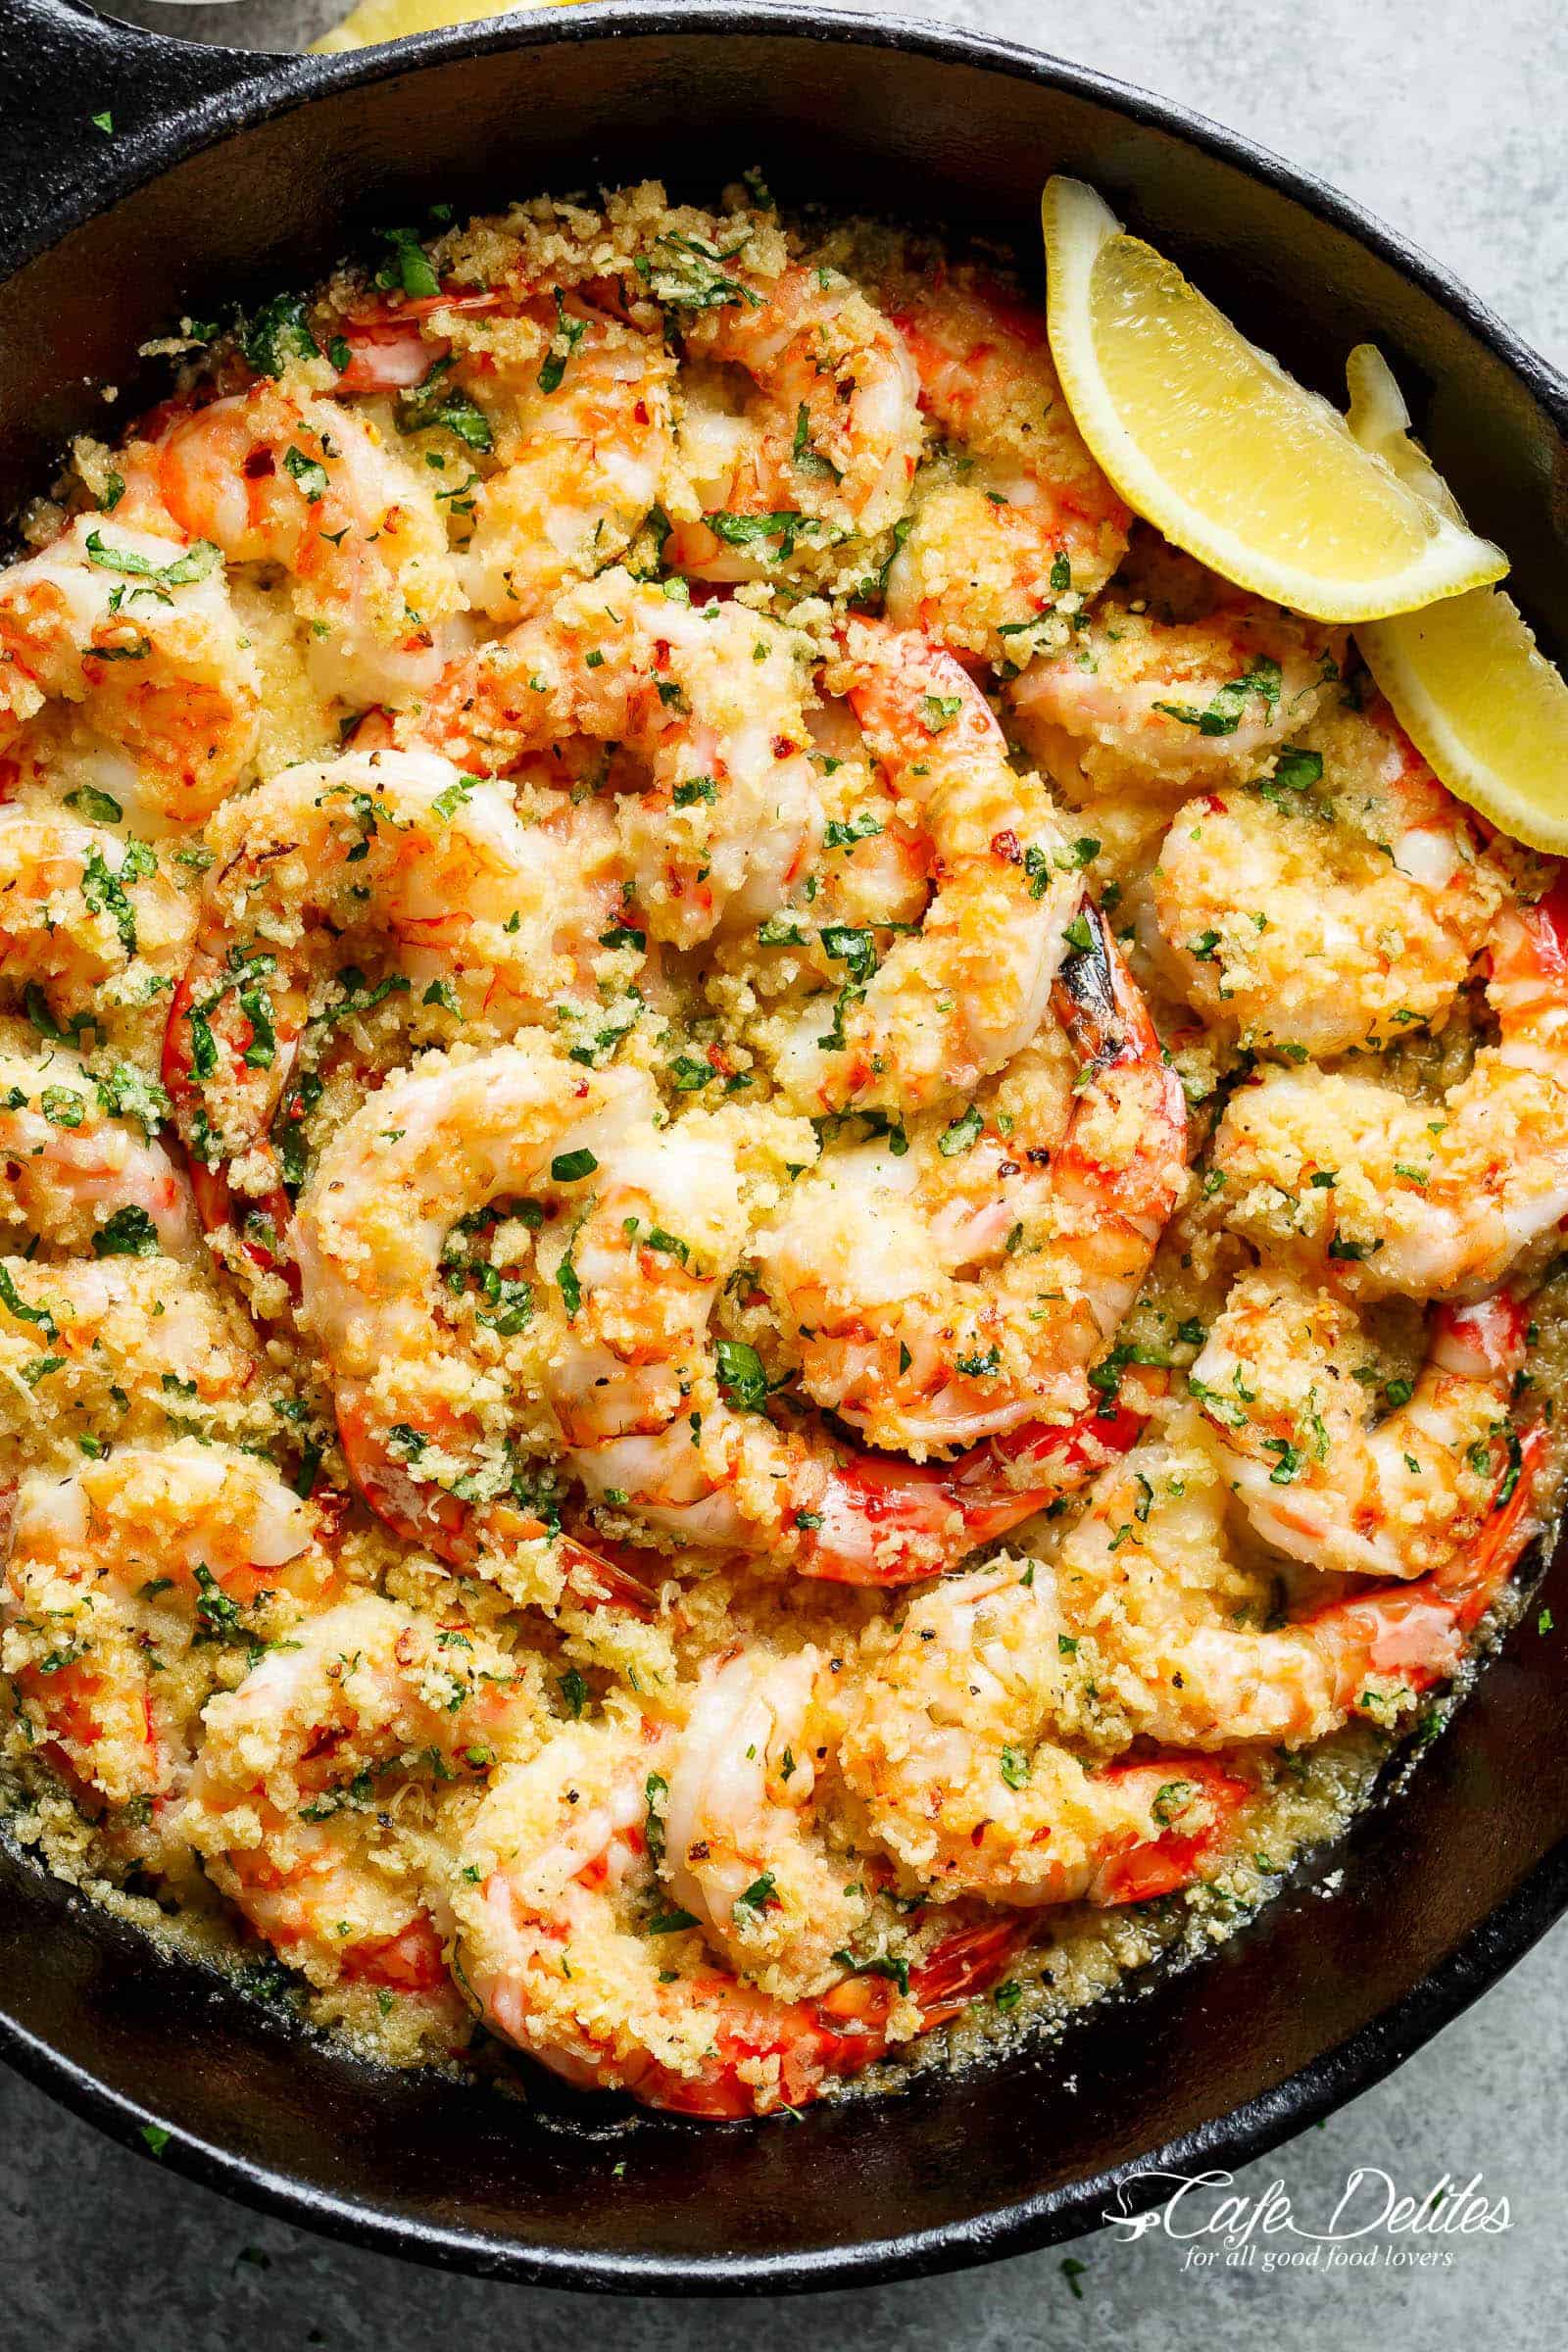 Oven baked shrimp with a hint of lemon and garlic, topped with flavourful golden and buttery, garlic parmesan breadcrumbs. This Crispy Baked Shrimp Scampi is easy to make with a fancy restaurant flair right at home, and takes only minutes to prepare! | cafedelites.com